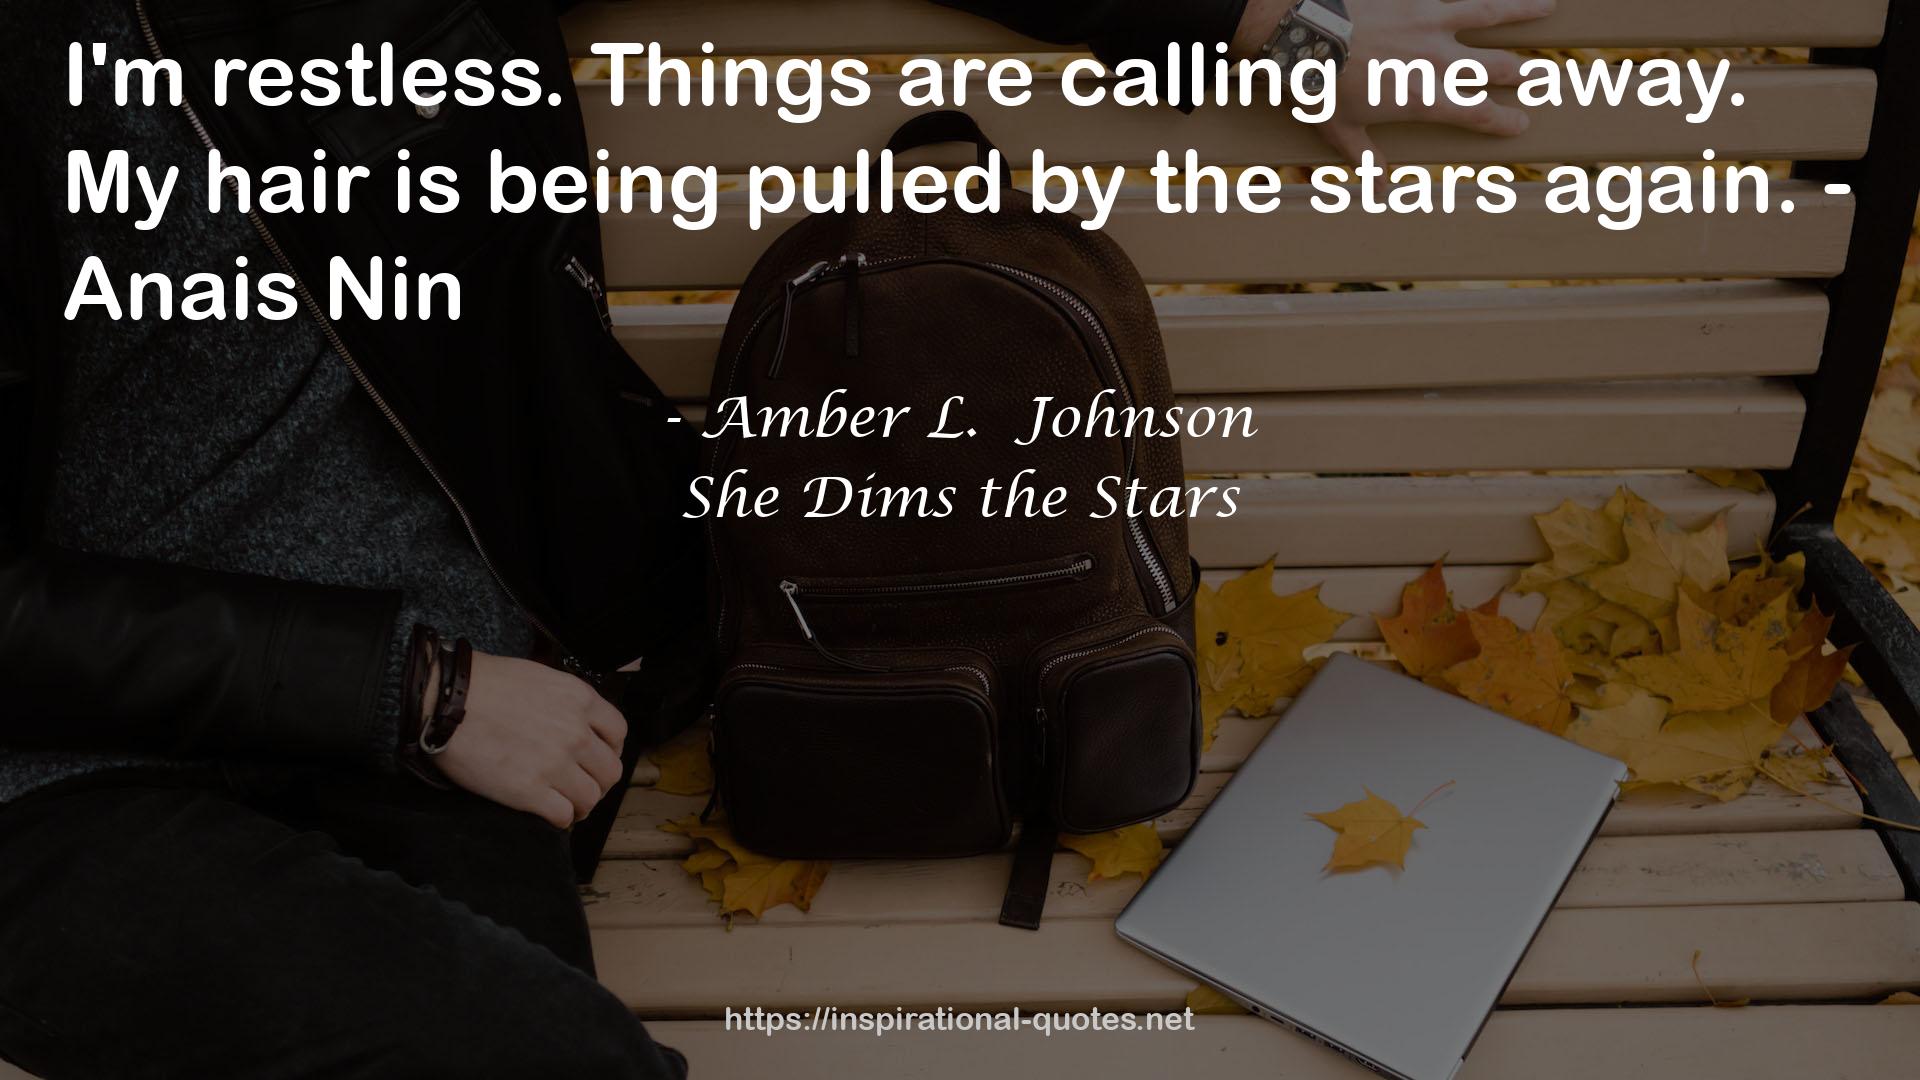 She Dims the Stars QUOTES